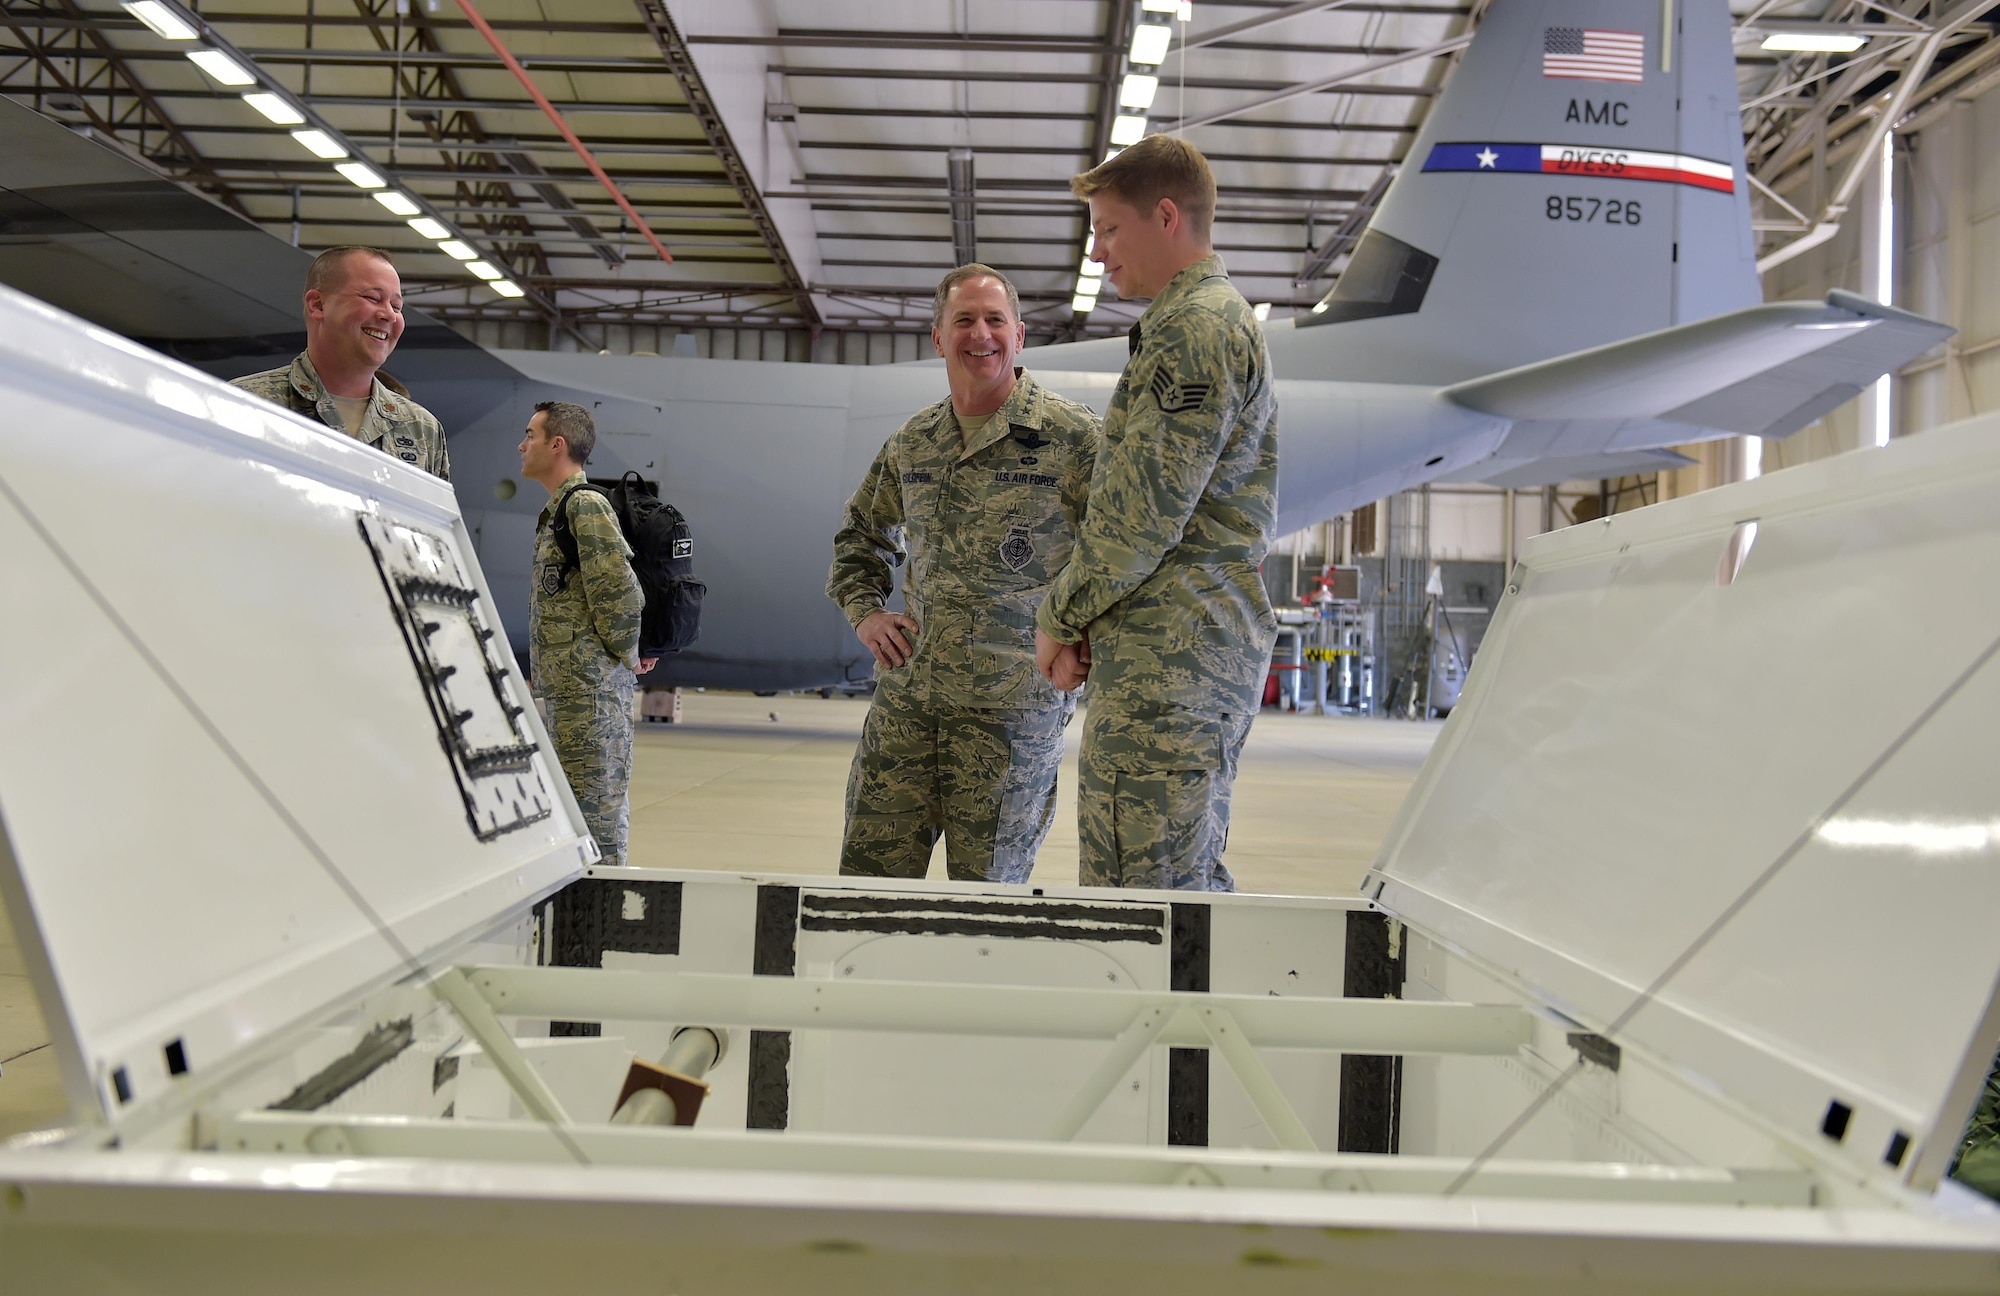 U.S. Air Force Vice Chief of Staff Gen. David L. Goldfein speaks with Staff Sgt. Gregory Beach, 86th Maintenance Squadron member, during his visit to Ramstein Air Base, Germany, 18 April 2016. Beach gave Goldfein a brief on a unique innovation developed and implemented locally where a filing cabinet was converted into fuel tank trainer. The fuel trainer was constructed out of the filing cabinet, expended parts, sheet metal and fasteners; the trainer eliminates exposure to hazardous fuel tanks on operational aircraft and without this innovative tool the unit would need to gain access to a wing section of a C-130J Hercules to ensure personnel remain trained. (U.S. Air Force photo/1st Lt. Clay Lancaster)